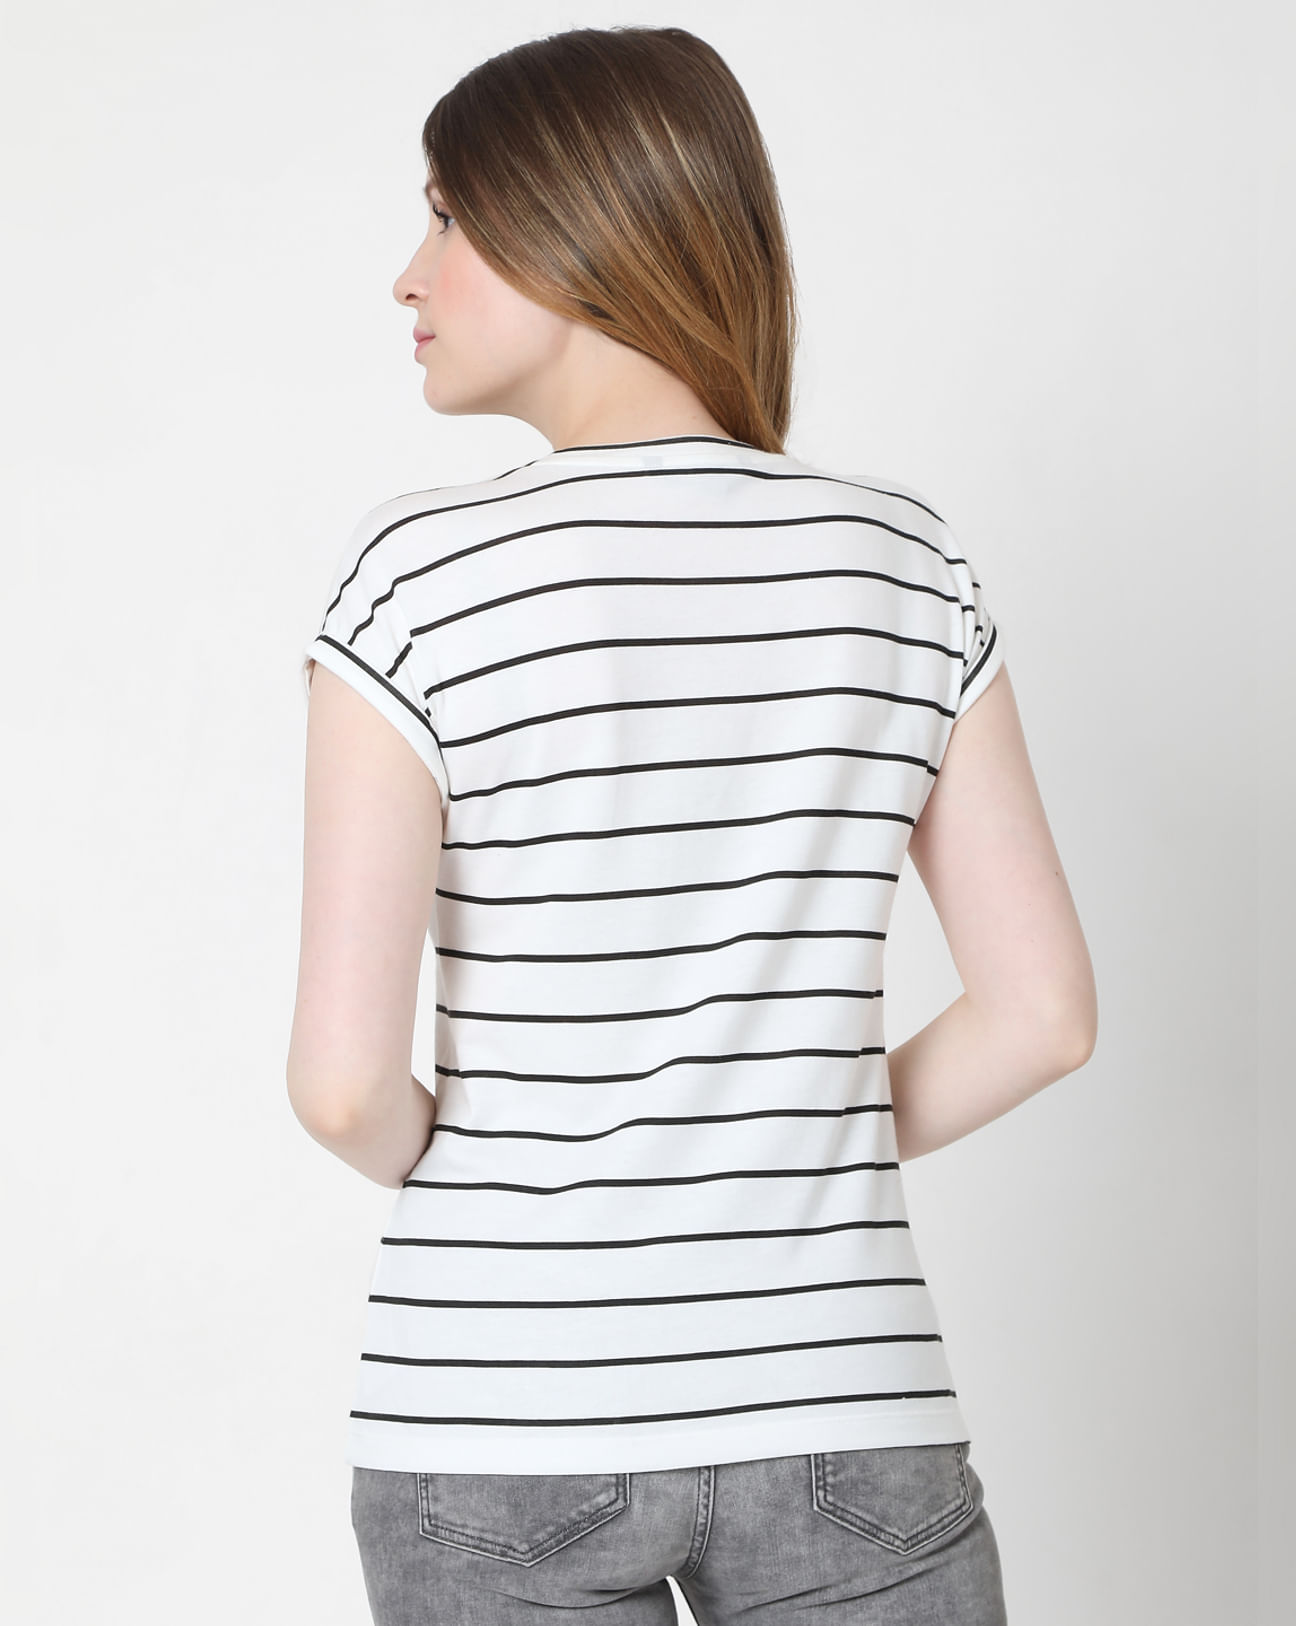 T-Shirts for In Buy - T-shirt Online Striped Graphic White Print Women